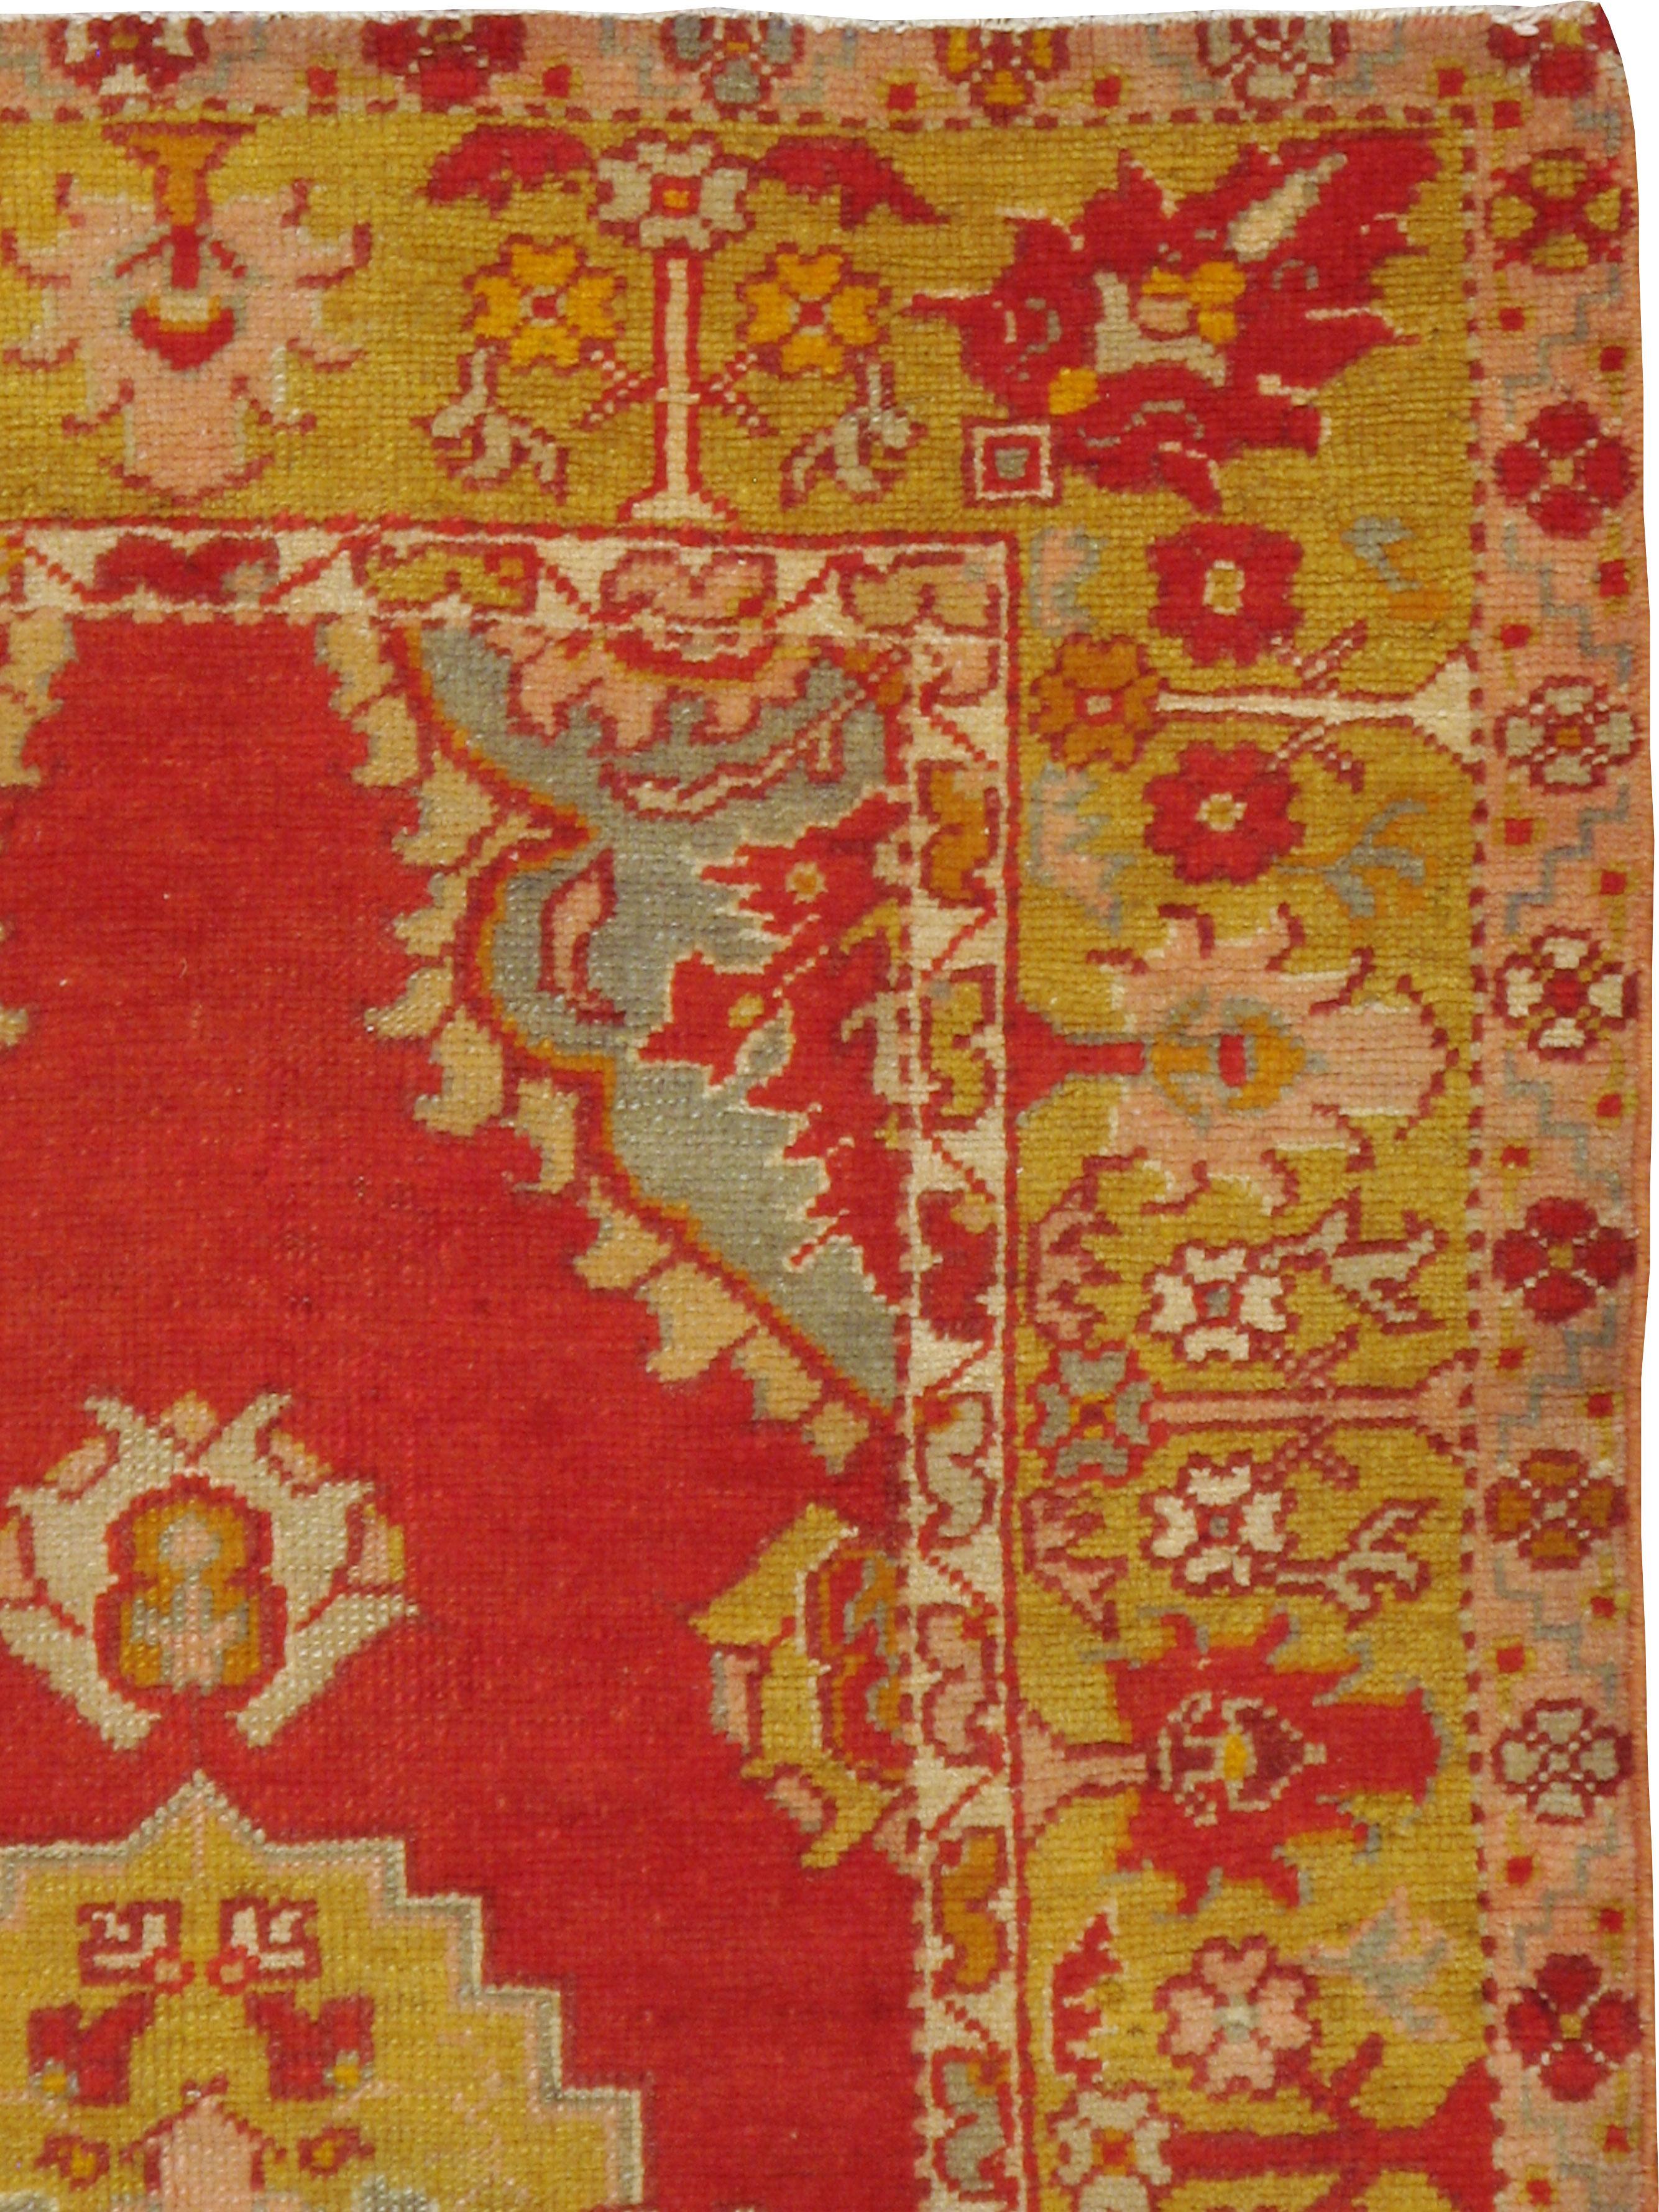 A vintage Turkish Oushak rug from the mid-20th century.

Measures: 2' 11